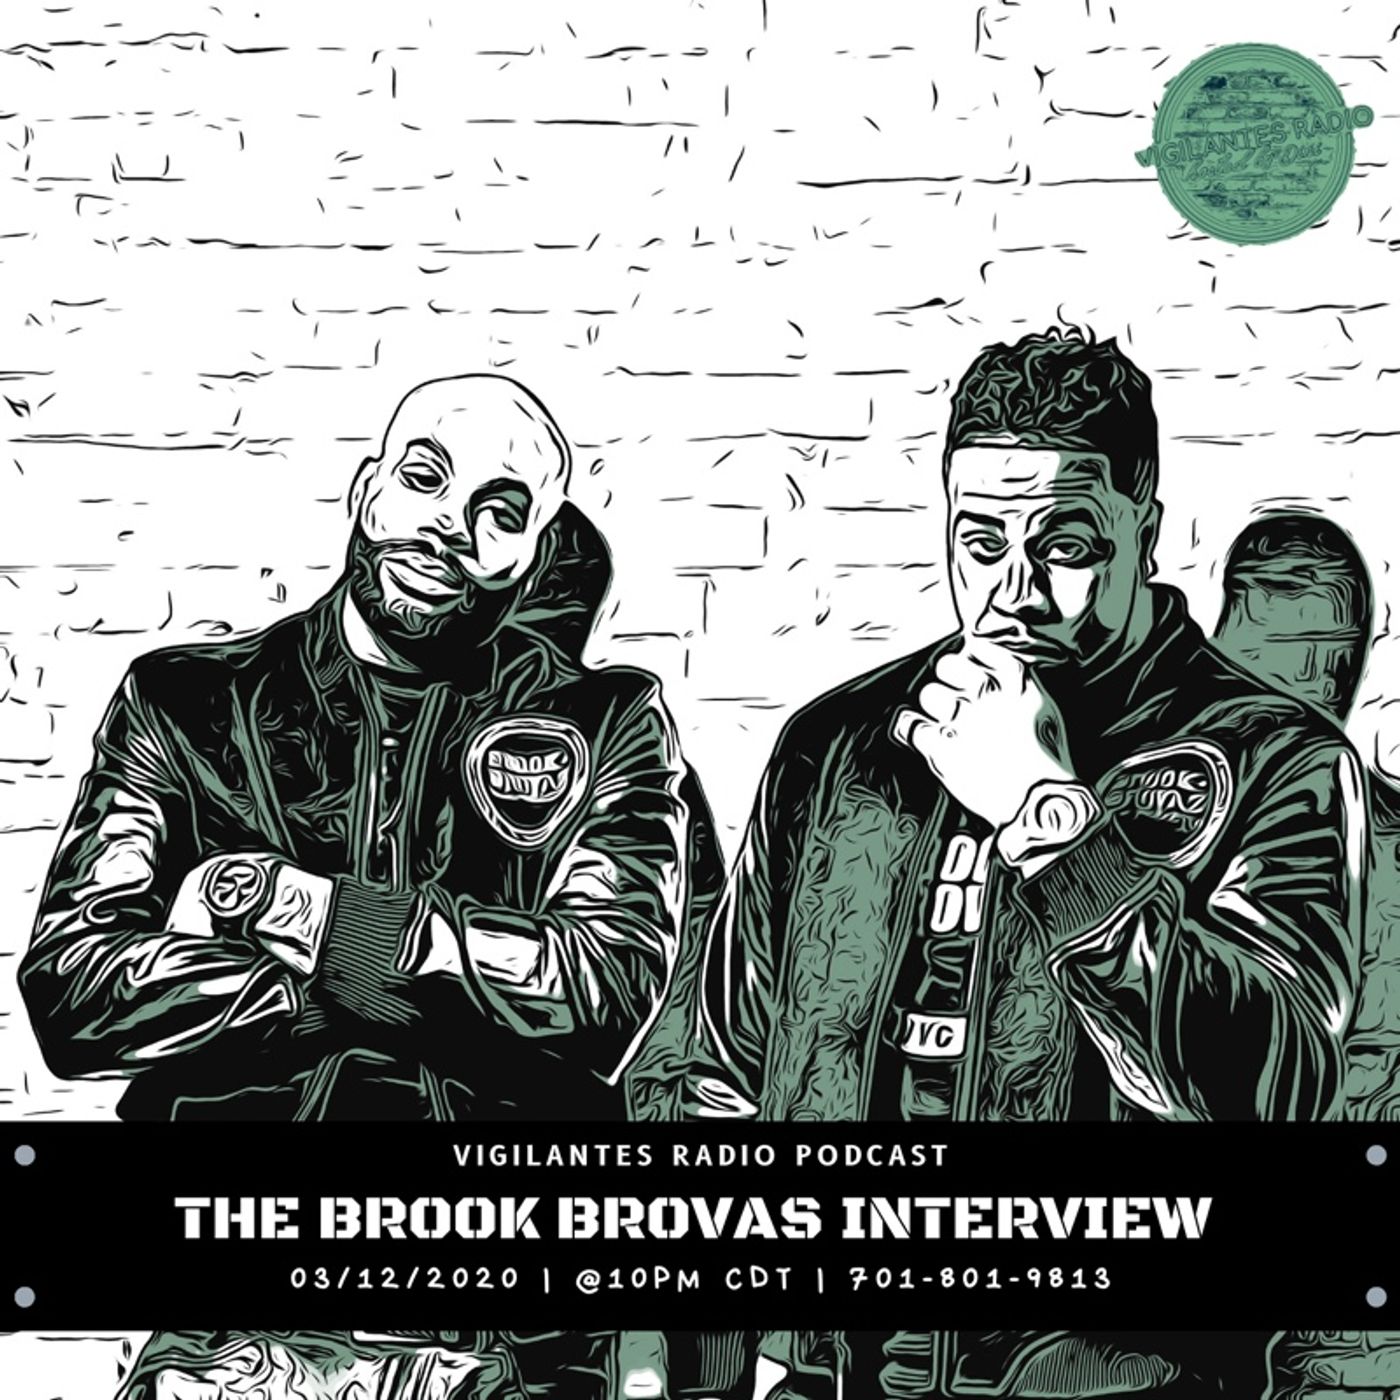 The Brook Brovaz Interview. Image